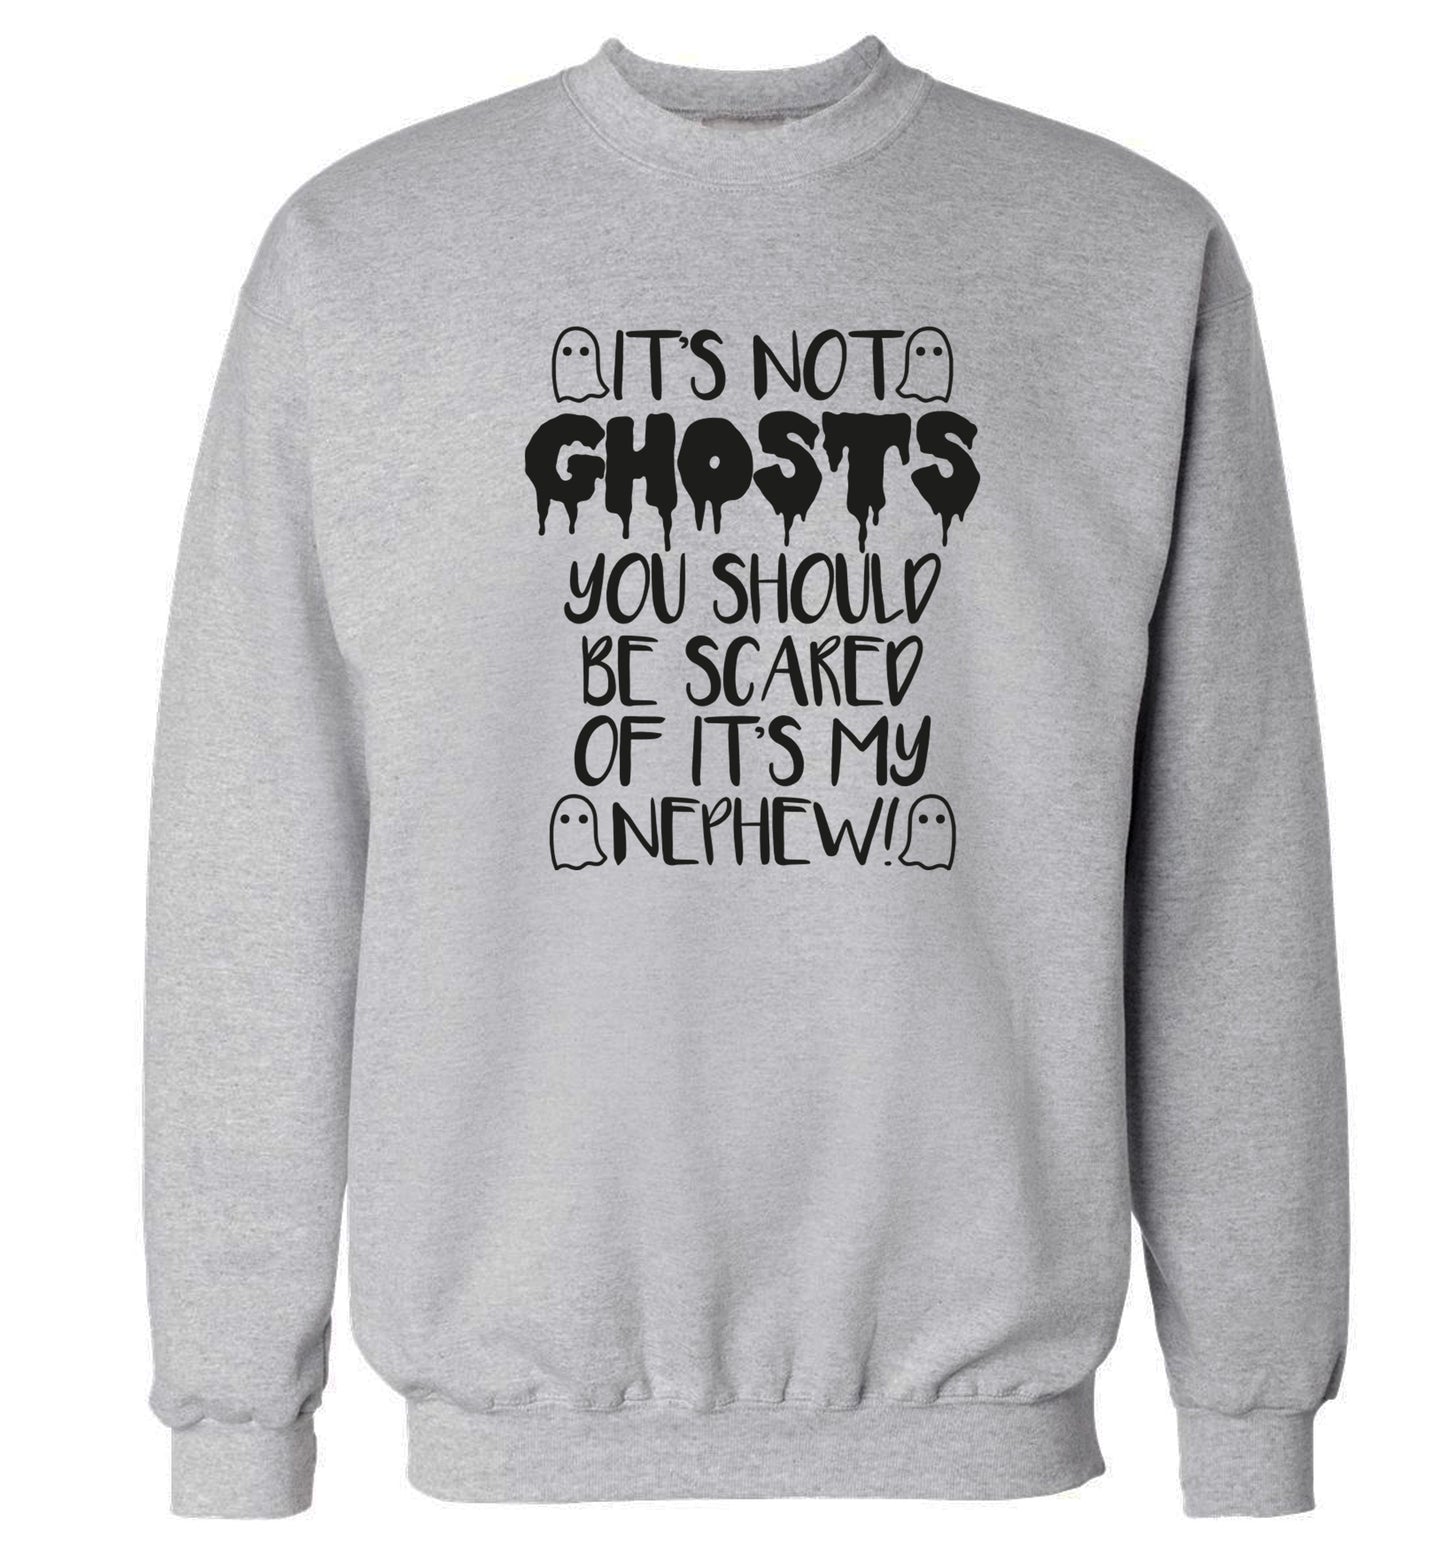 It's not ghosts you should be scared of it's my nephew! Adult's unisex grey Sweater 2XL